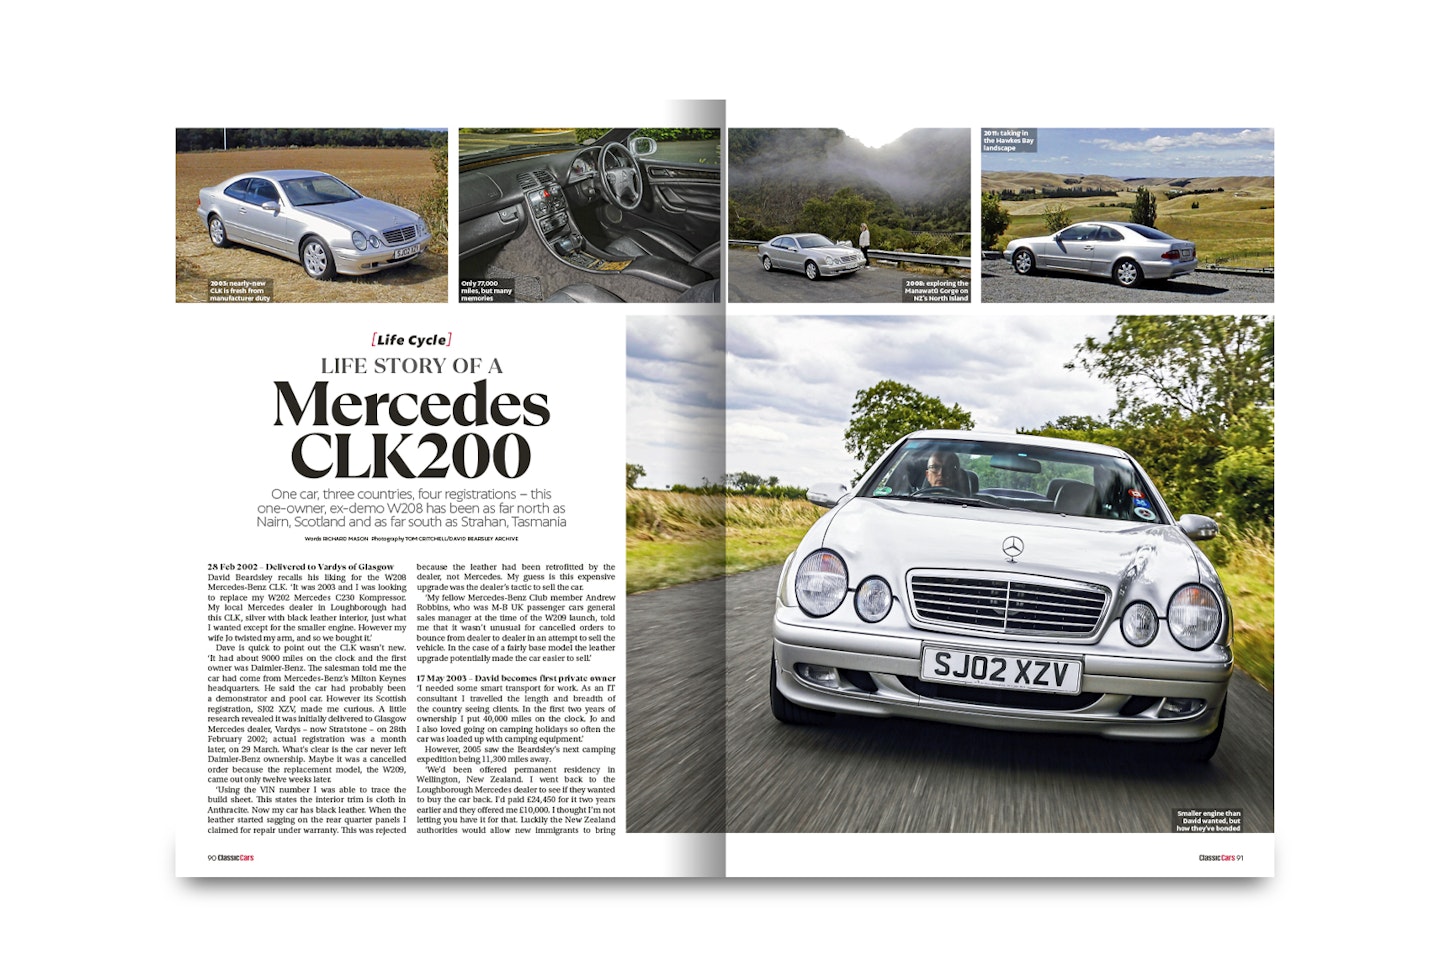 Life Cycle – The two-continent-crossing, mega-mileage Mercedes-Benz CLK200